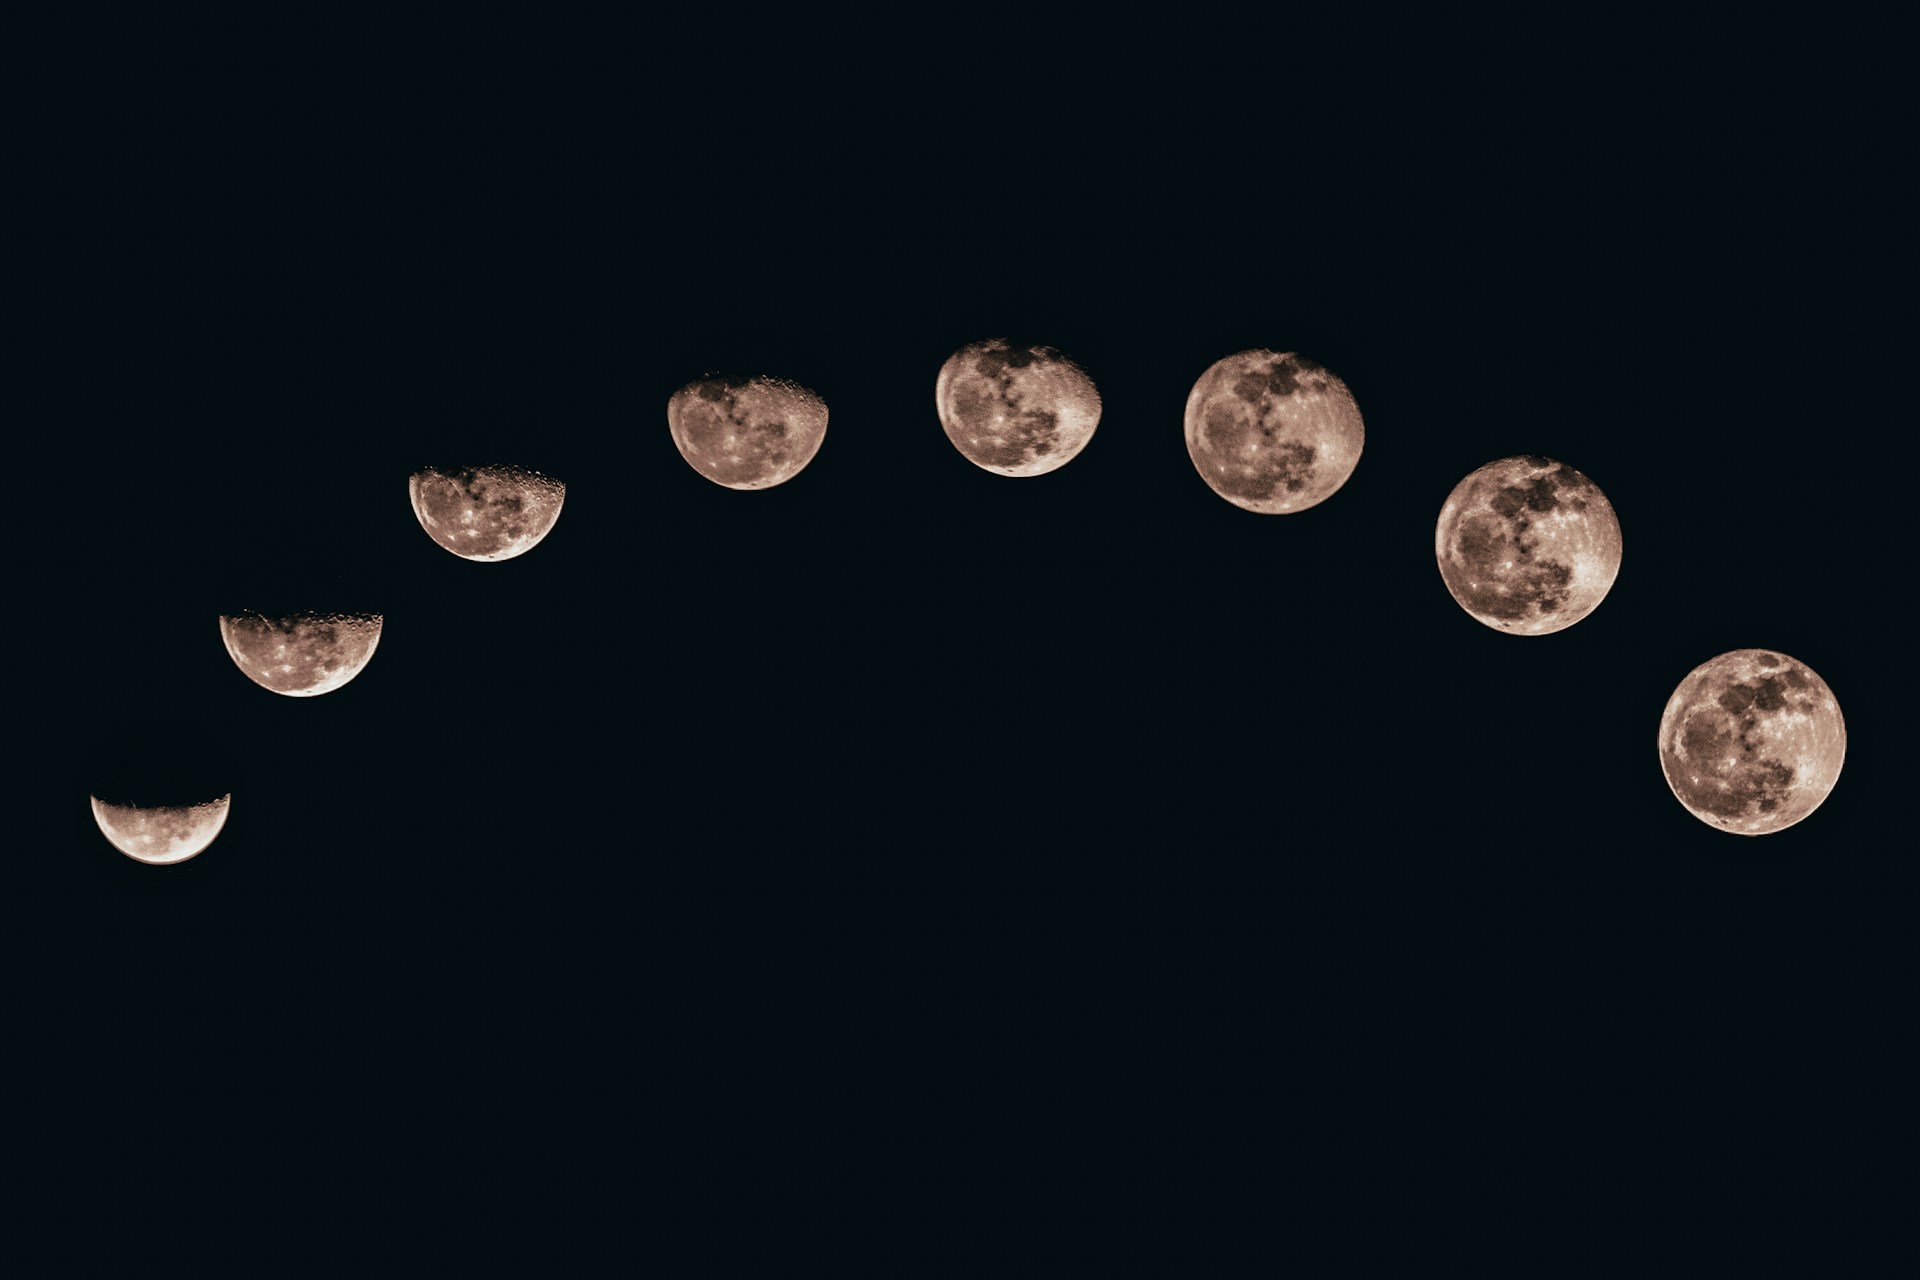 8 Phases of the Moon Wallpaper 1920x1280